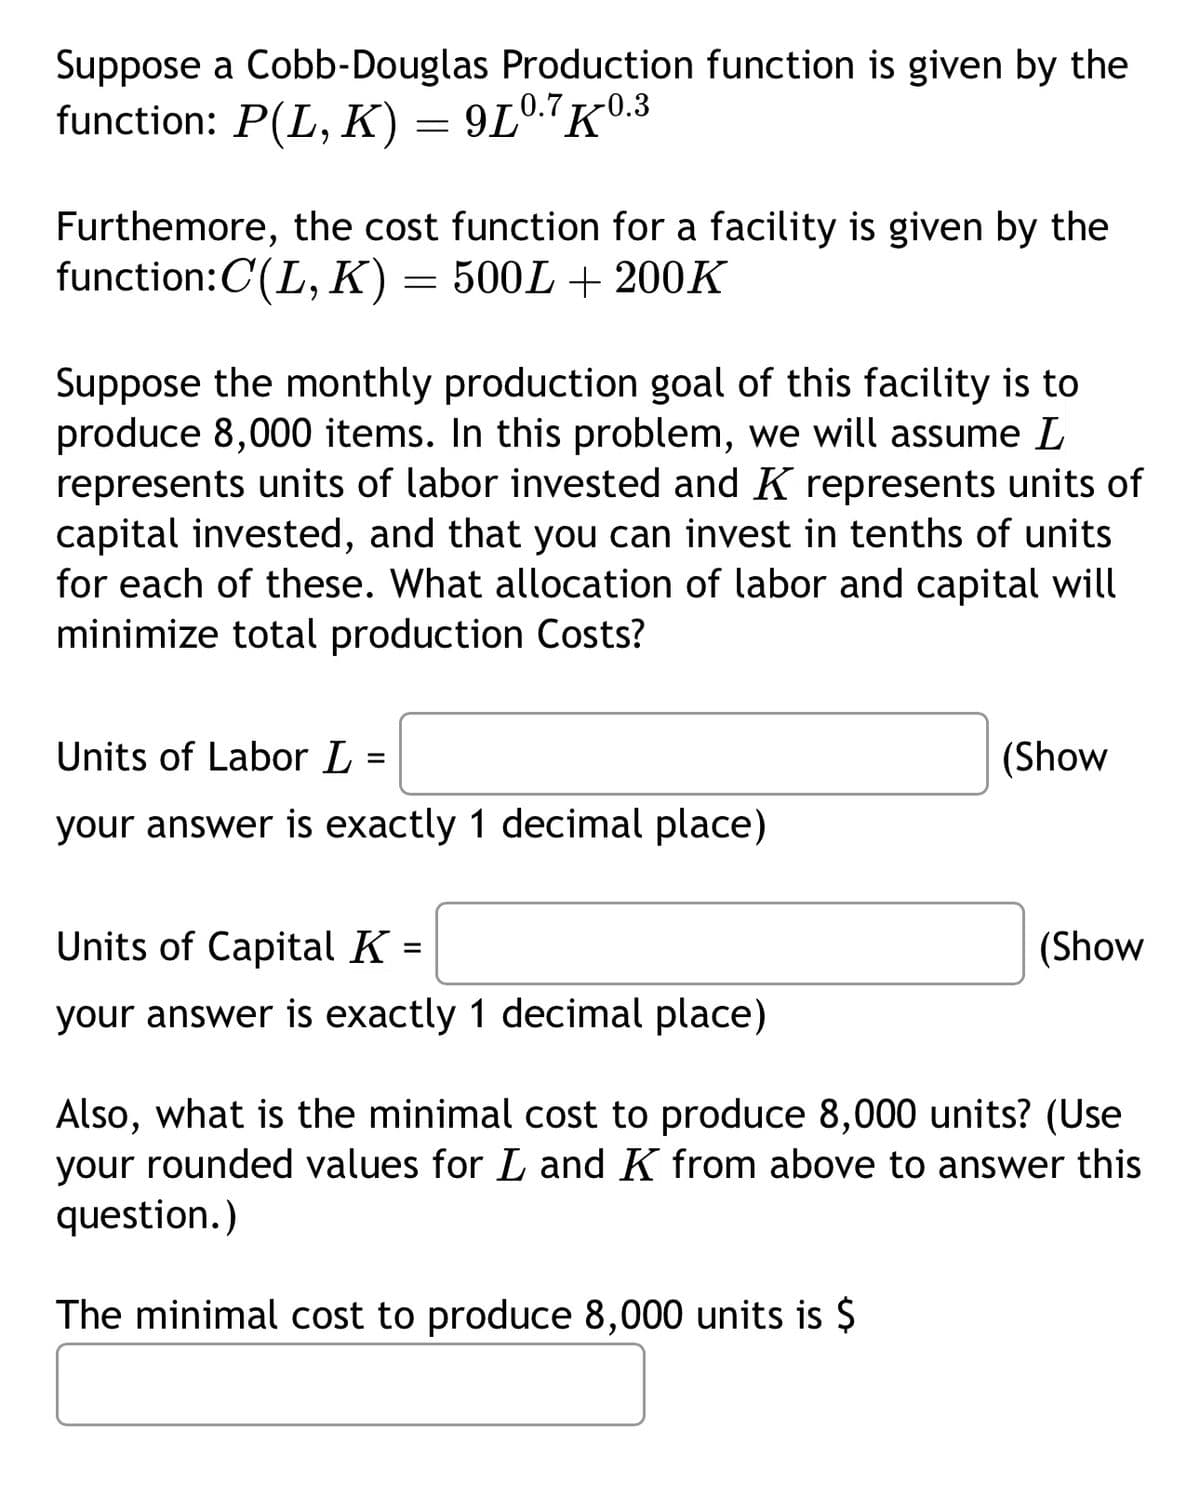 Suppose a Cobb-Douglas Production function is given by the
function: P(L, K) = 9L0.7K0.3
Furthemore, the cost function for a facility is given by the
function: C(L, K) = 500L + 200K
Suppose the monthly production goal of this facility is to
produce 8,000 items. In this problem, we will assume L
represents units of labor invested and K represents units of
capital invested, and that you can invest in tenths of units
for each of these. What allocation of labor and capital will
minimize total production Costs?
Units of Labor L =
your answer is exactly 1 decimal place)
Units of Capital K =
your answer is exactly 1 decimal place)
(Show
(Show
Also, what is the minimal cost to produce 8,000 units? (Use
your rounded values for L and K from above to answer this
question.)
The minimal cost to produce 8,000 units is $